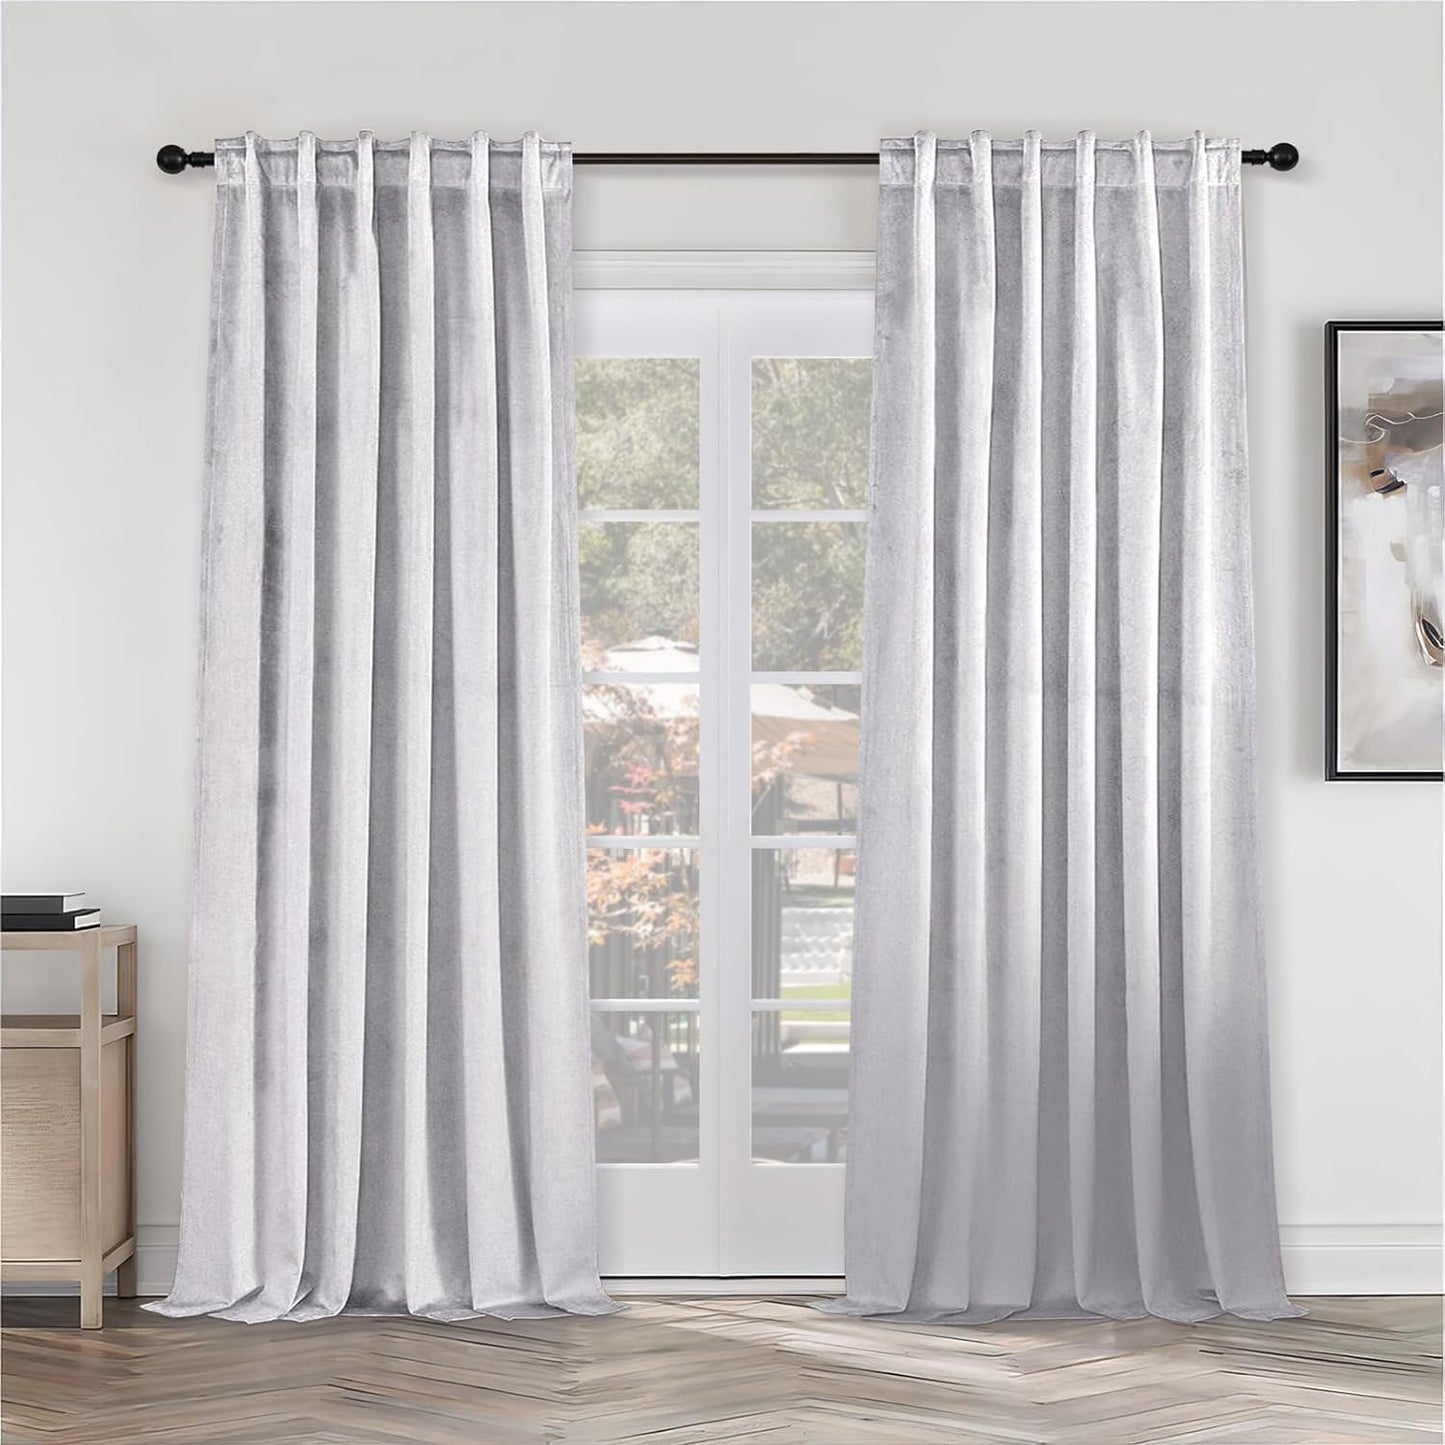 Topfinel Olive Green Velvet Curtains 84 Inches Long for Living Room,Blackout Thermal Insulated Curtains for Bedroom,Back Tab Modern Window Treatment for Living Room,52X84 Inch Length,Olive Green  Top Fine Grayish White 52" X 84" 